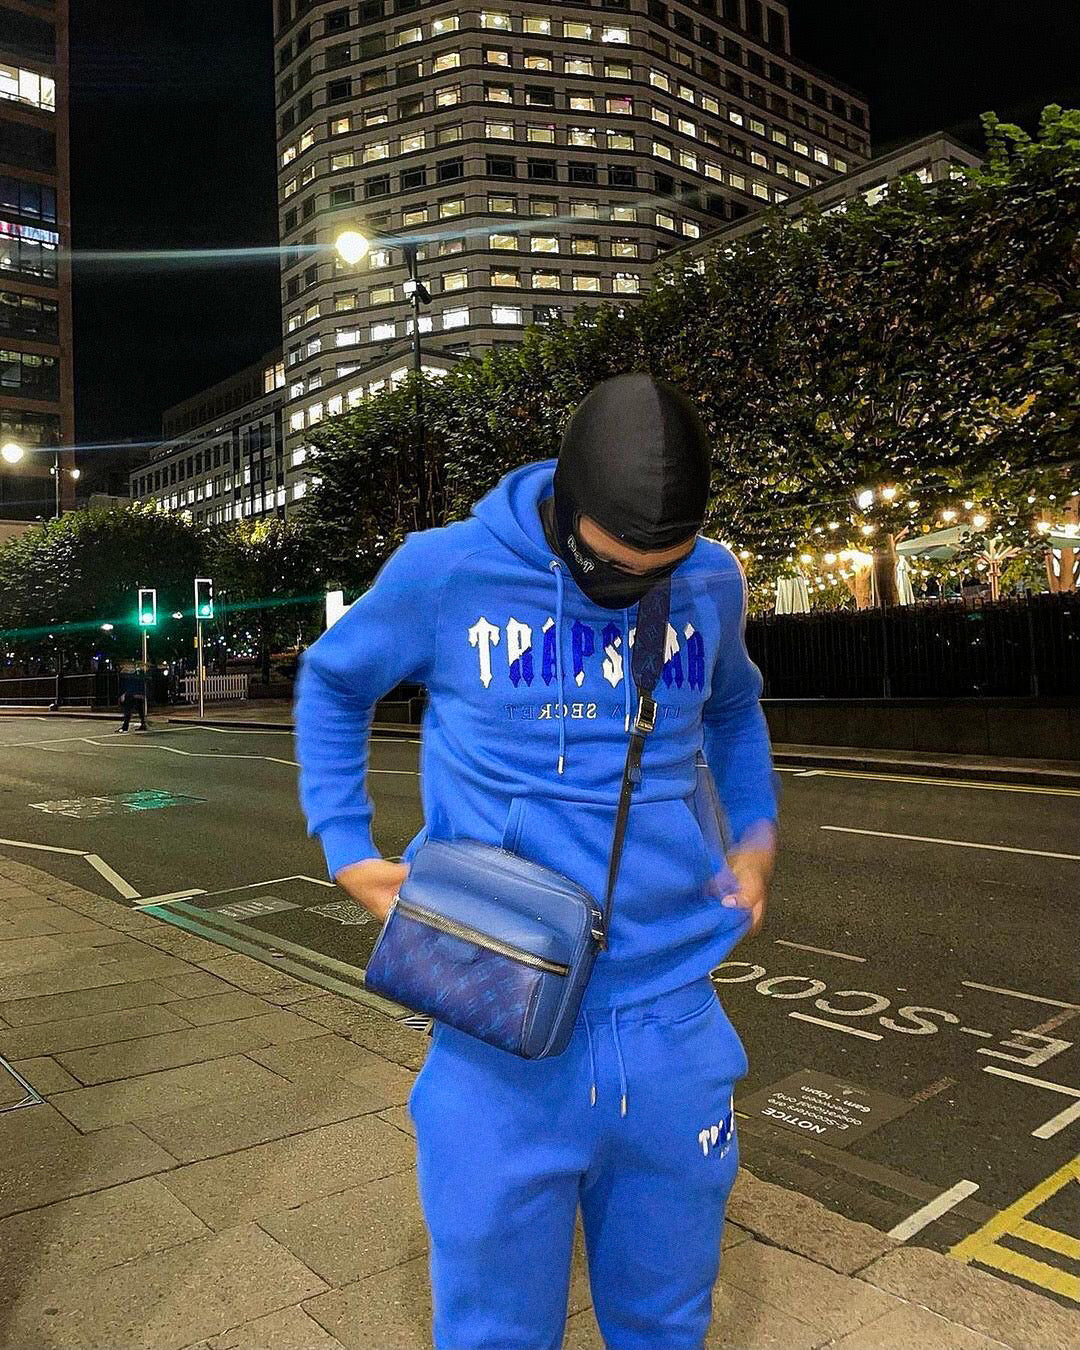 Decoded Blue Tracksuit